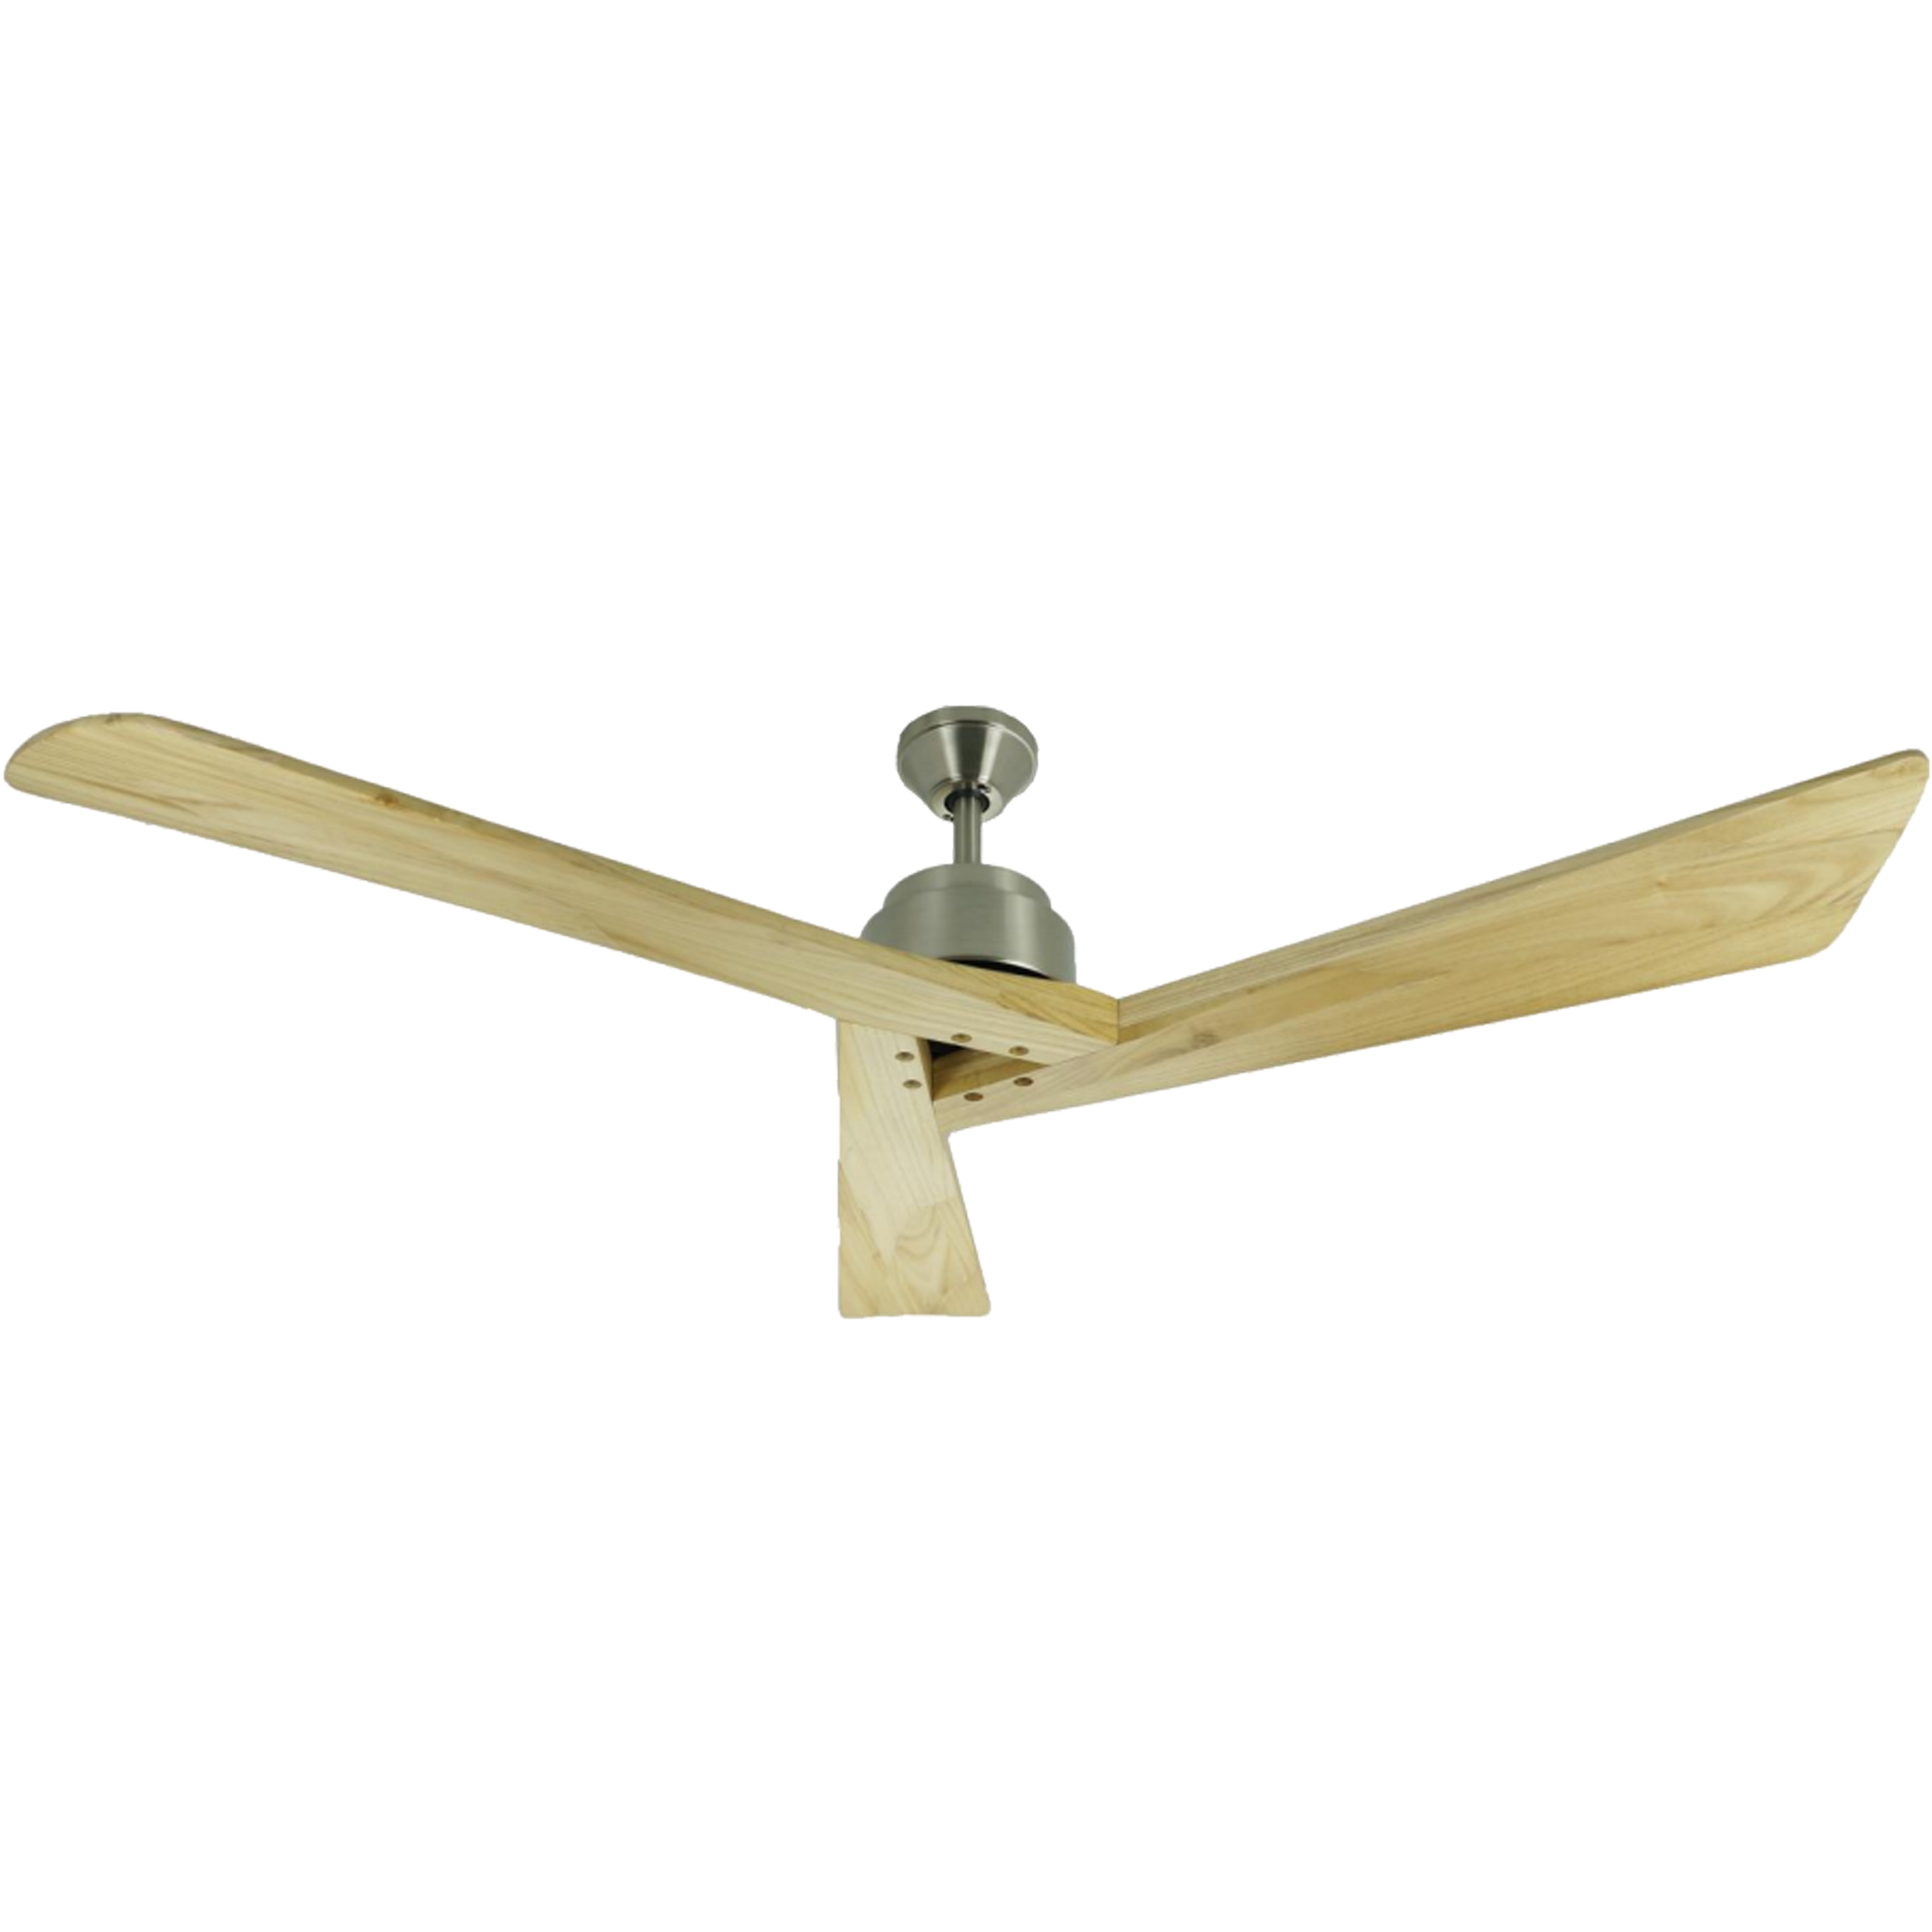 Airbena 60 Inch Wooden Blade Dc Motor Ceiling Fan with Remote Control